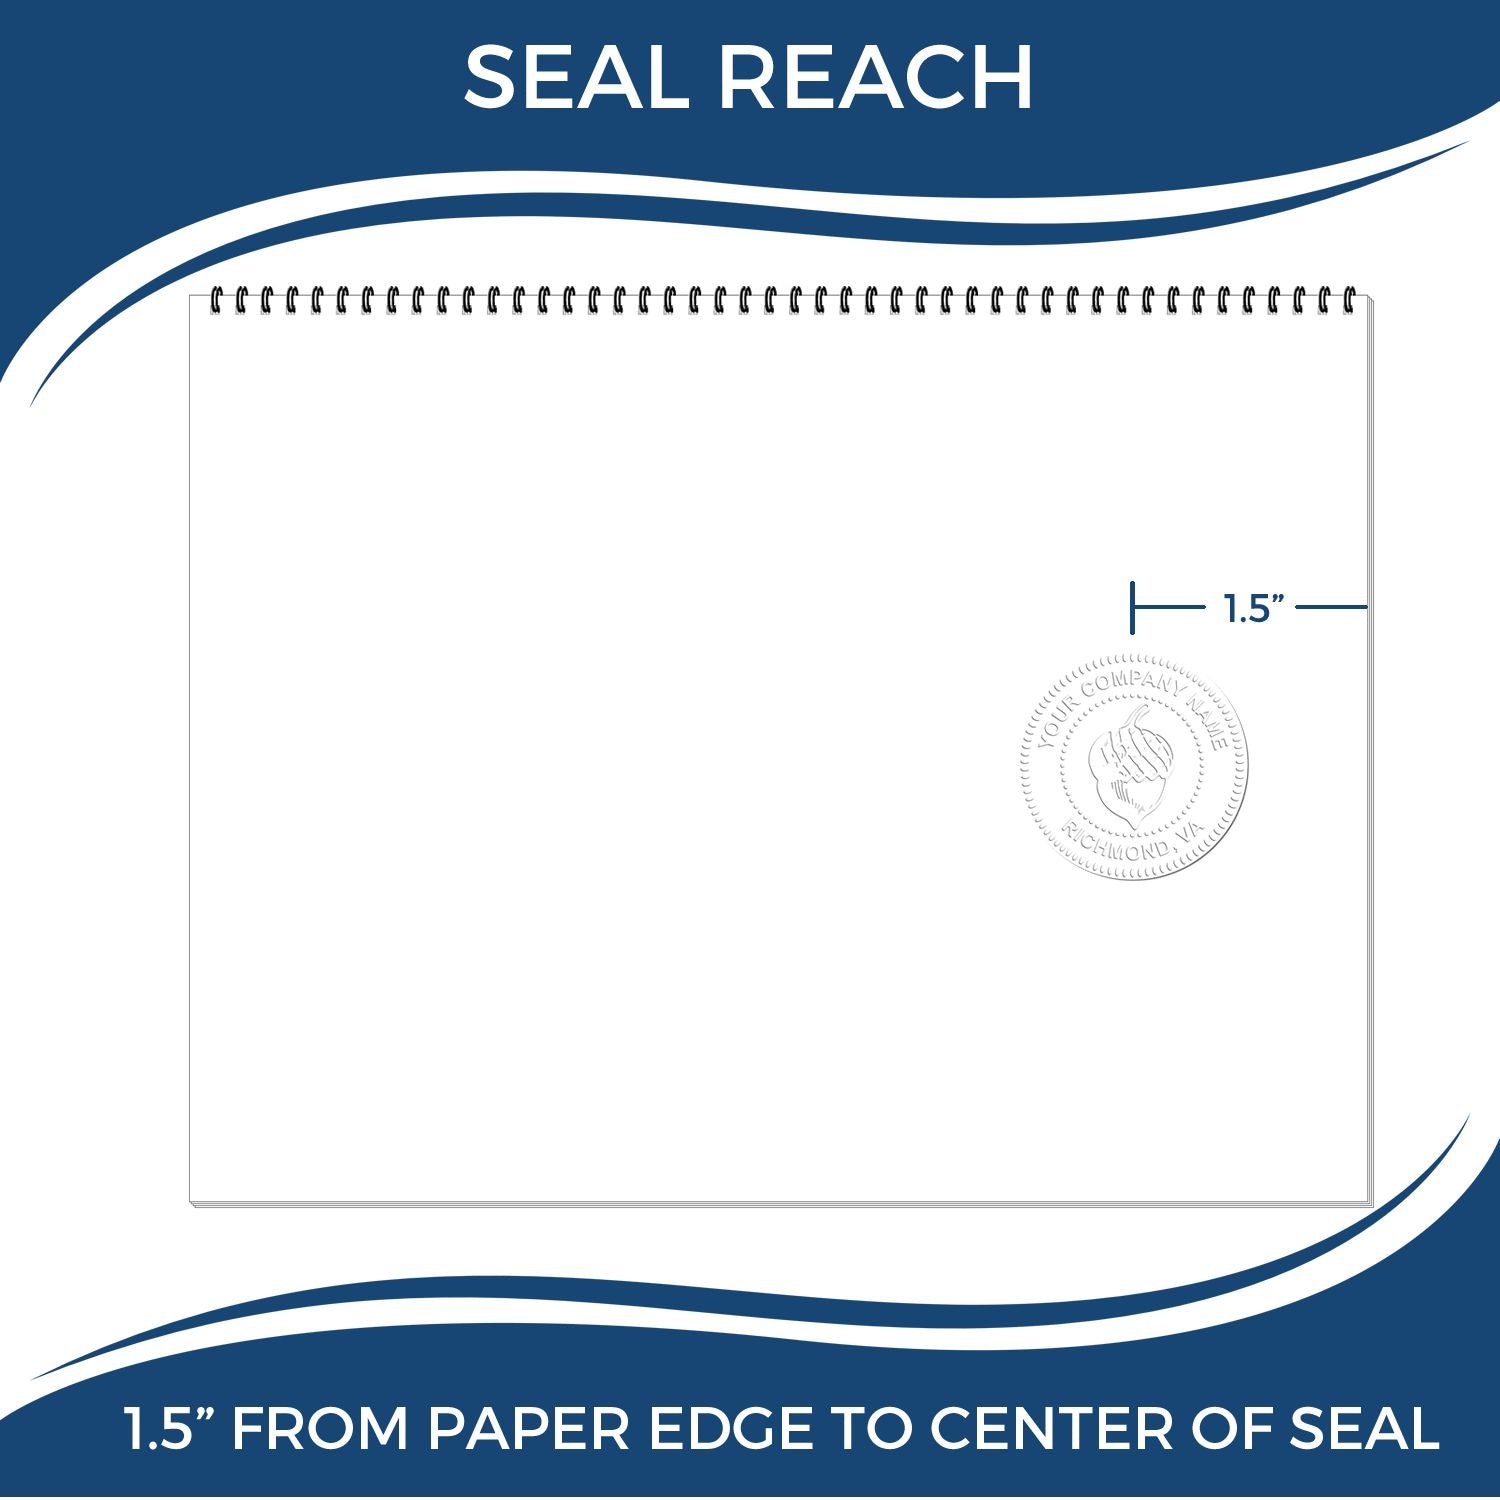 An infographic showing the seal reach which is represented by a ruler and a miniature seal image of the Handheld Arkansas Architect Seal Embosser